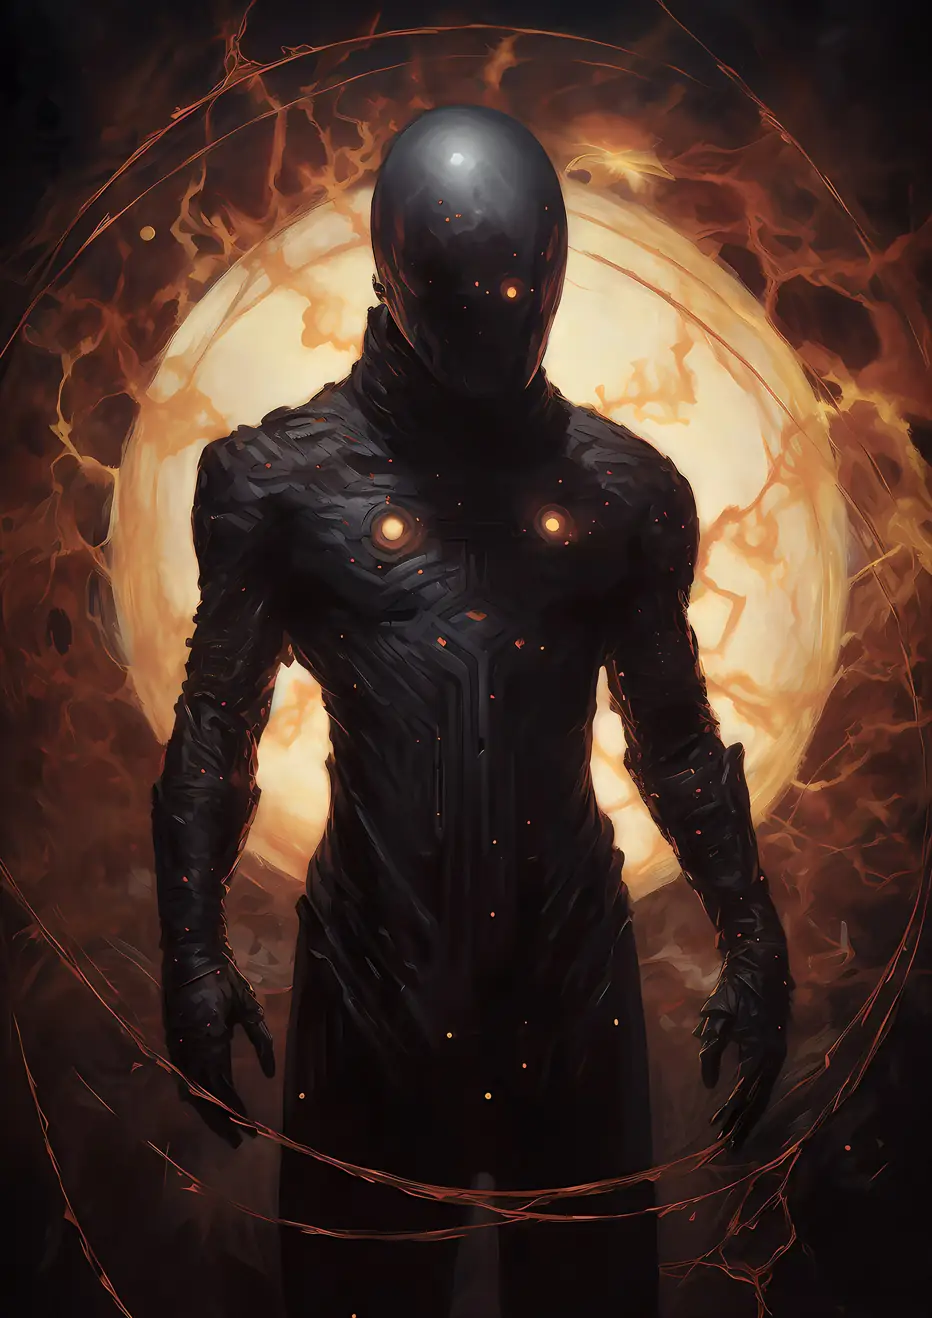 Black Hole Divinity: A lone figure in a black spacesuit.